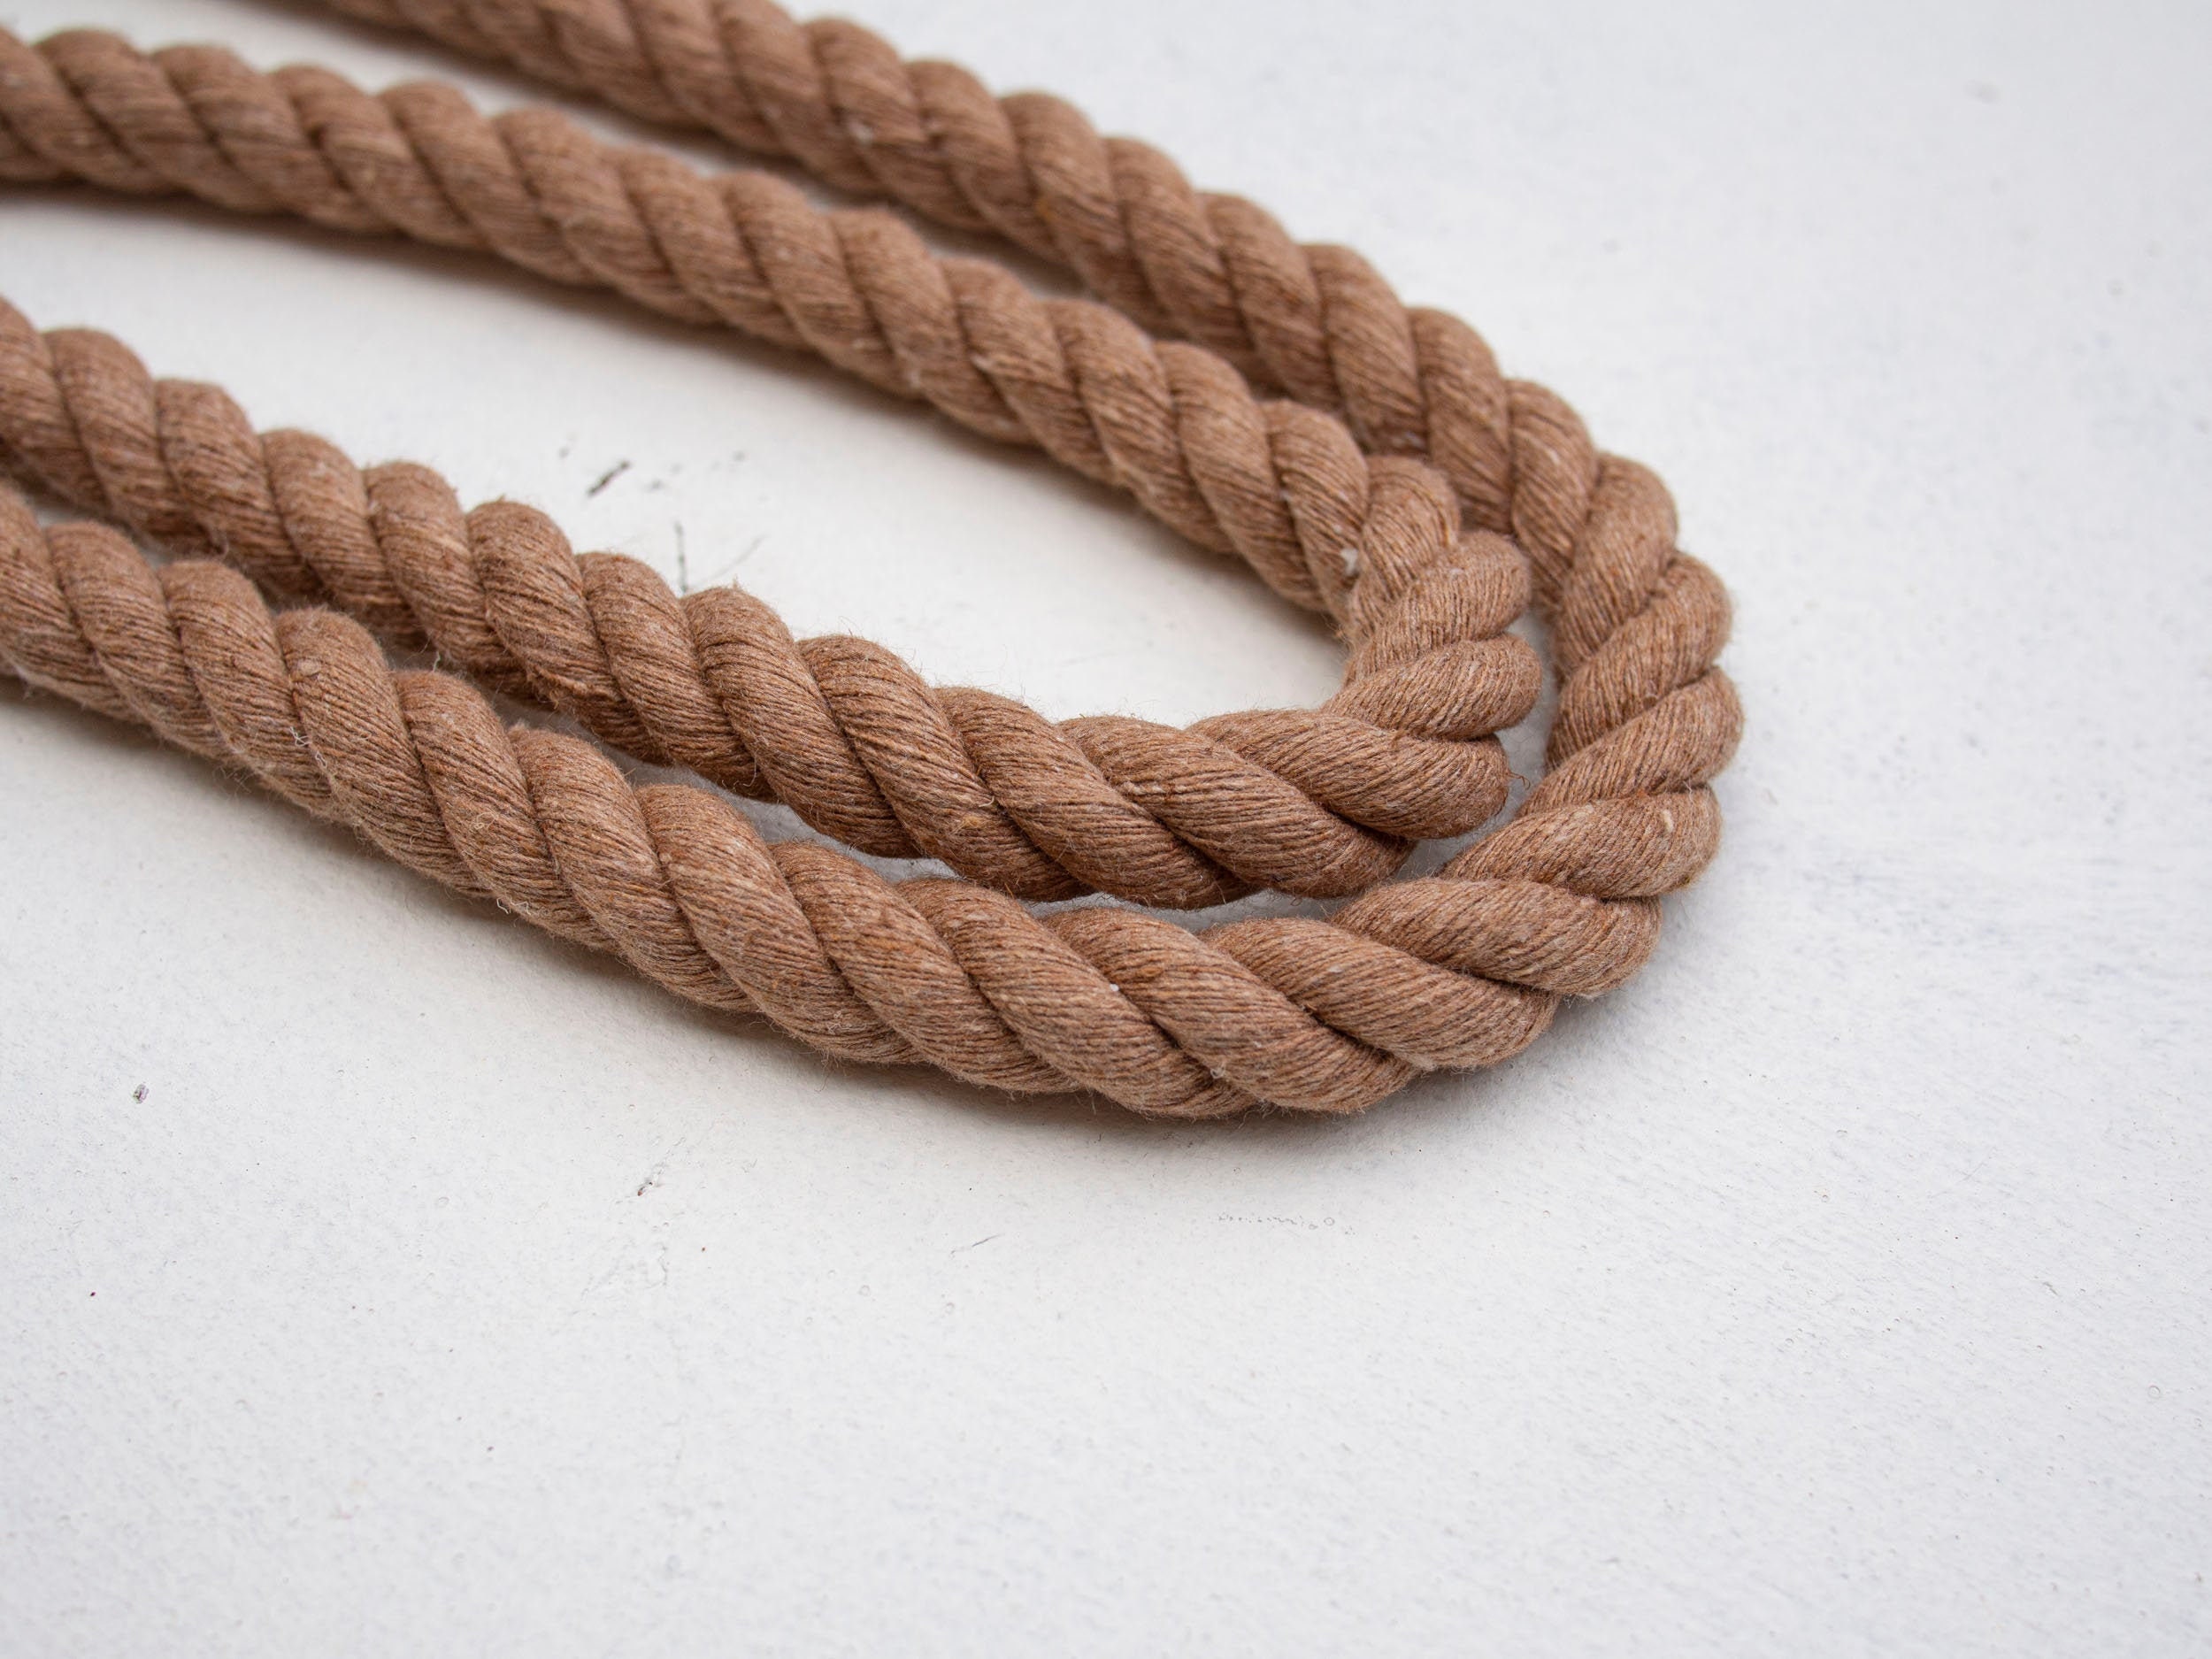 10 Mm Three Twisted Cotton Rope ,brown Twisted High Quality Cotton  Cord,soft Macrame Cotton Cord,diy Projects,home Decoration,nautical Rope -   Canada